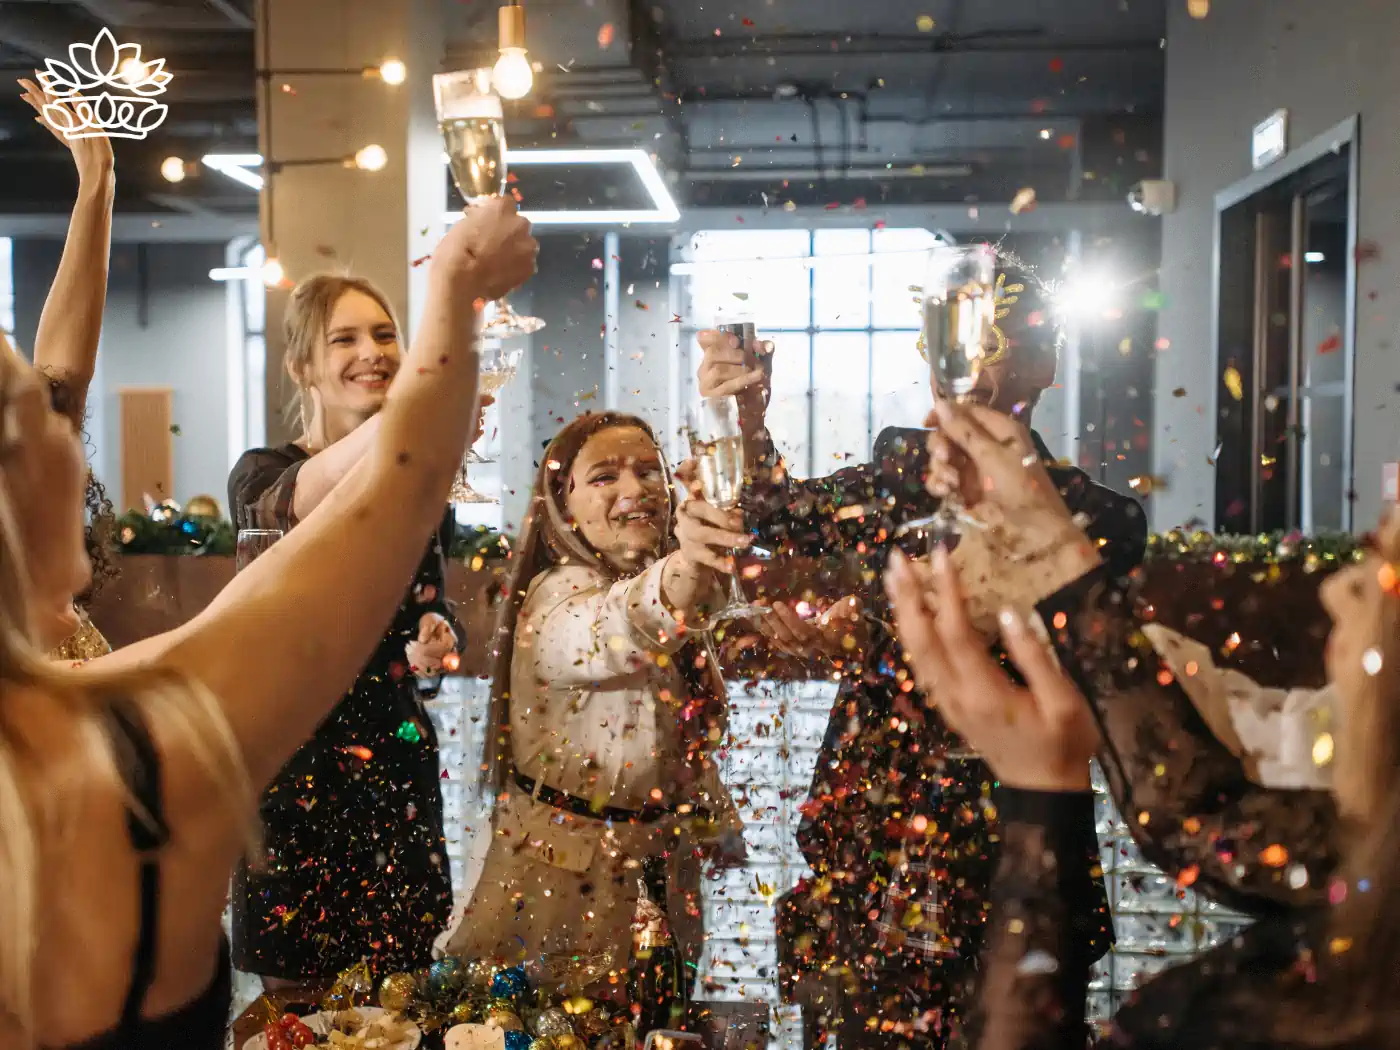 ose-up of hands toasting with champagne glasses amid golden confetti, highlighting the "Jubilee" collection by Fabulous Flowers and Gifts.